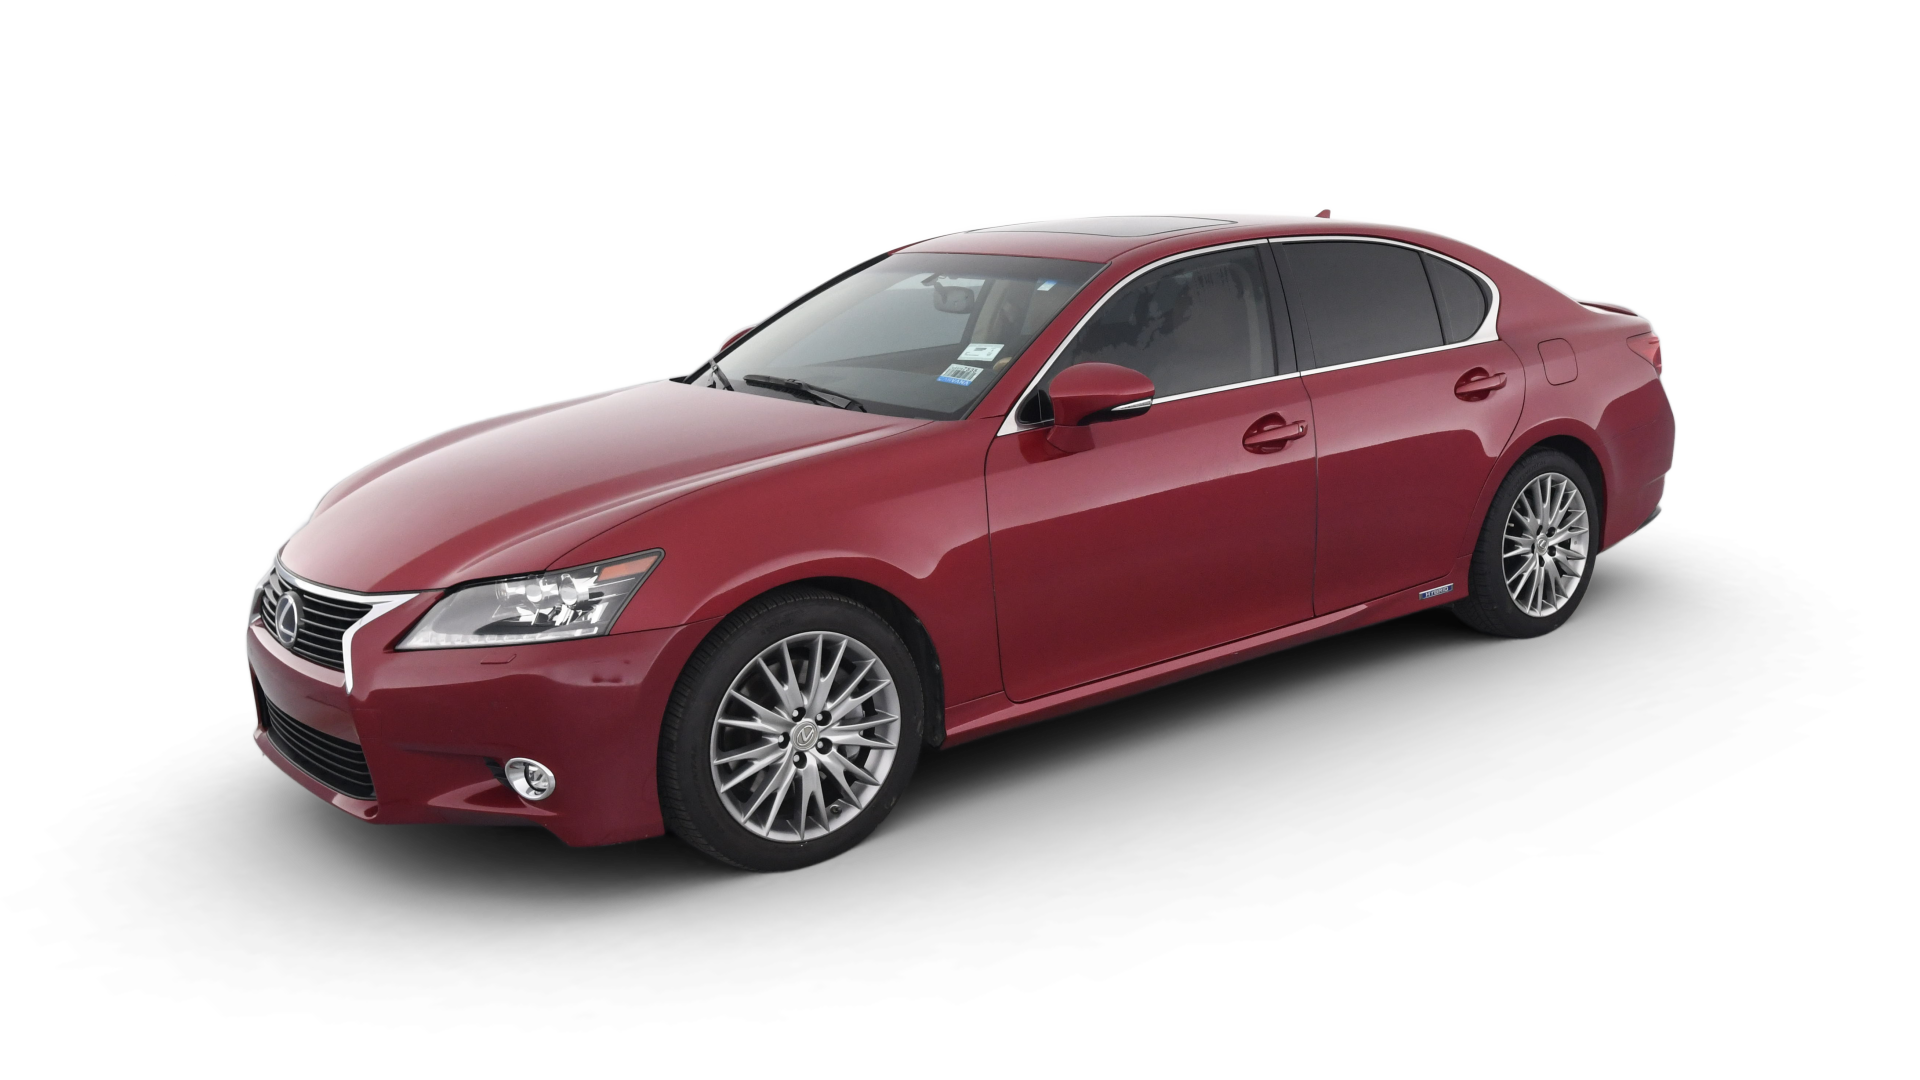 Used Lexus GS 450h For Sale Online | Carvana